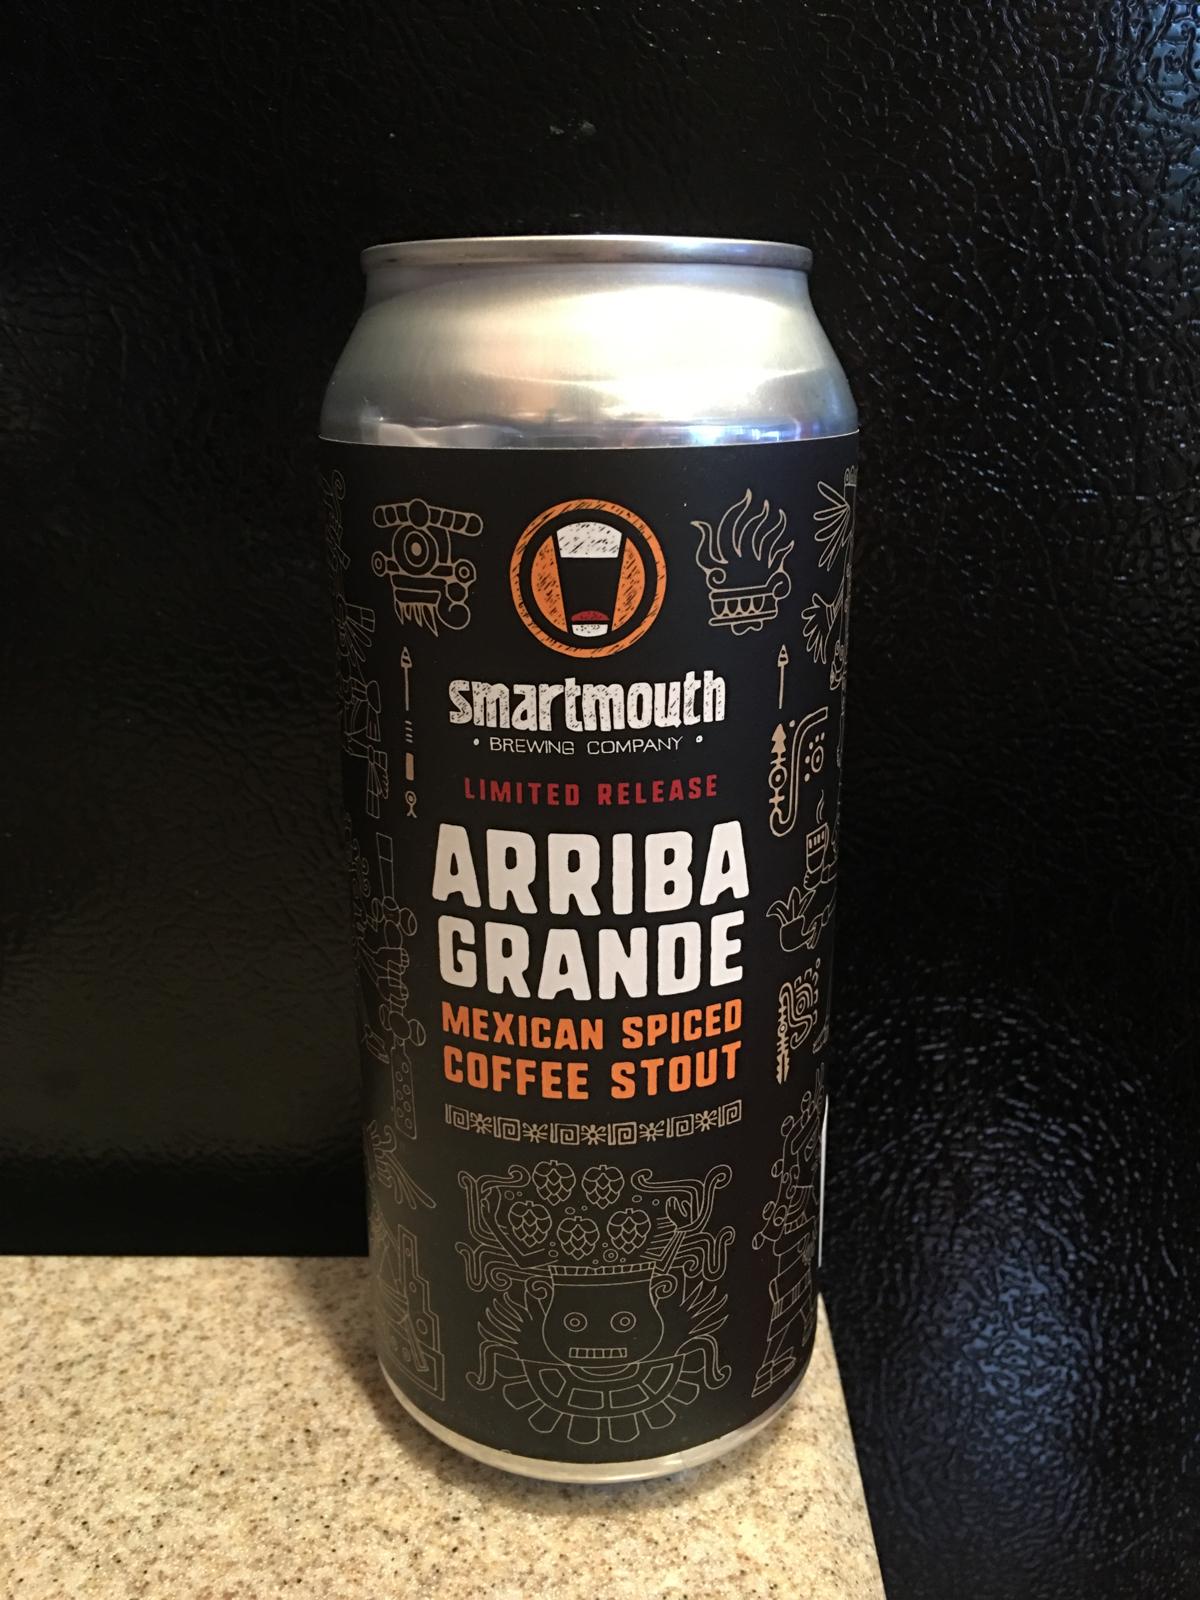 Arriba Grande Mexican Spiced Coffee Stout: Limited Release